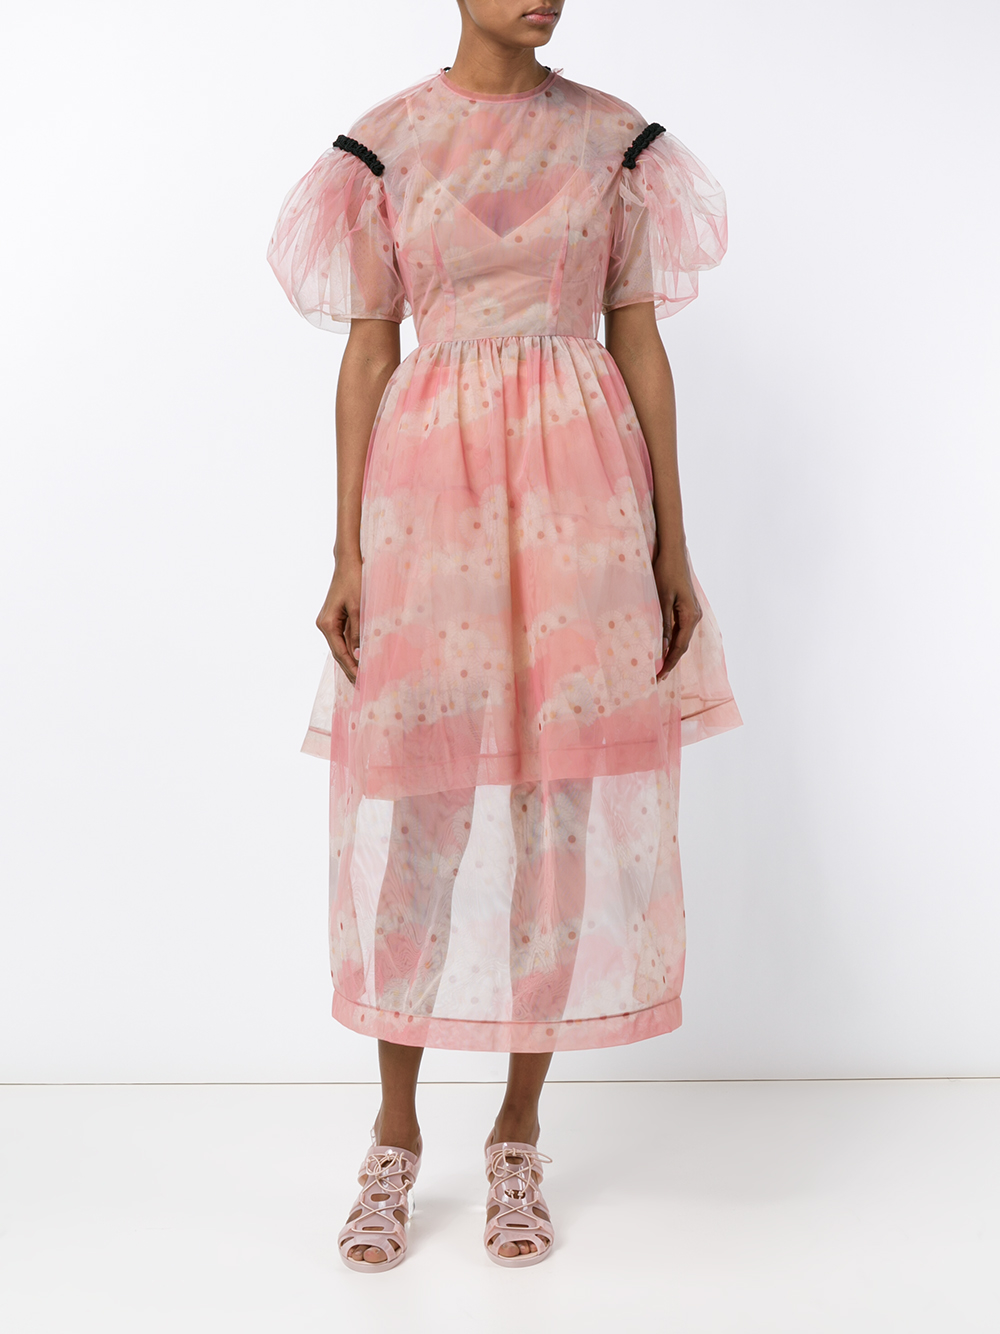 Lyst - Simone rocha Floral Print Tulle Apron Top in Pink